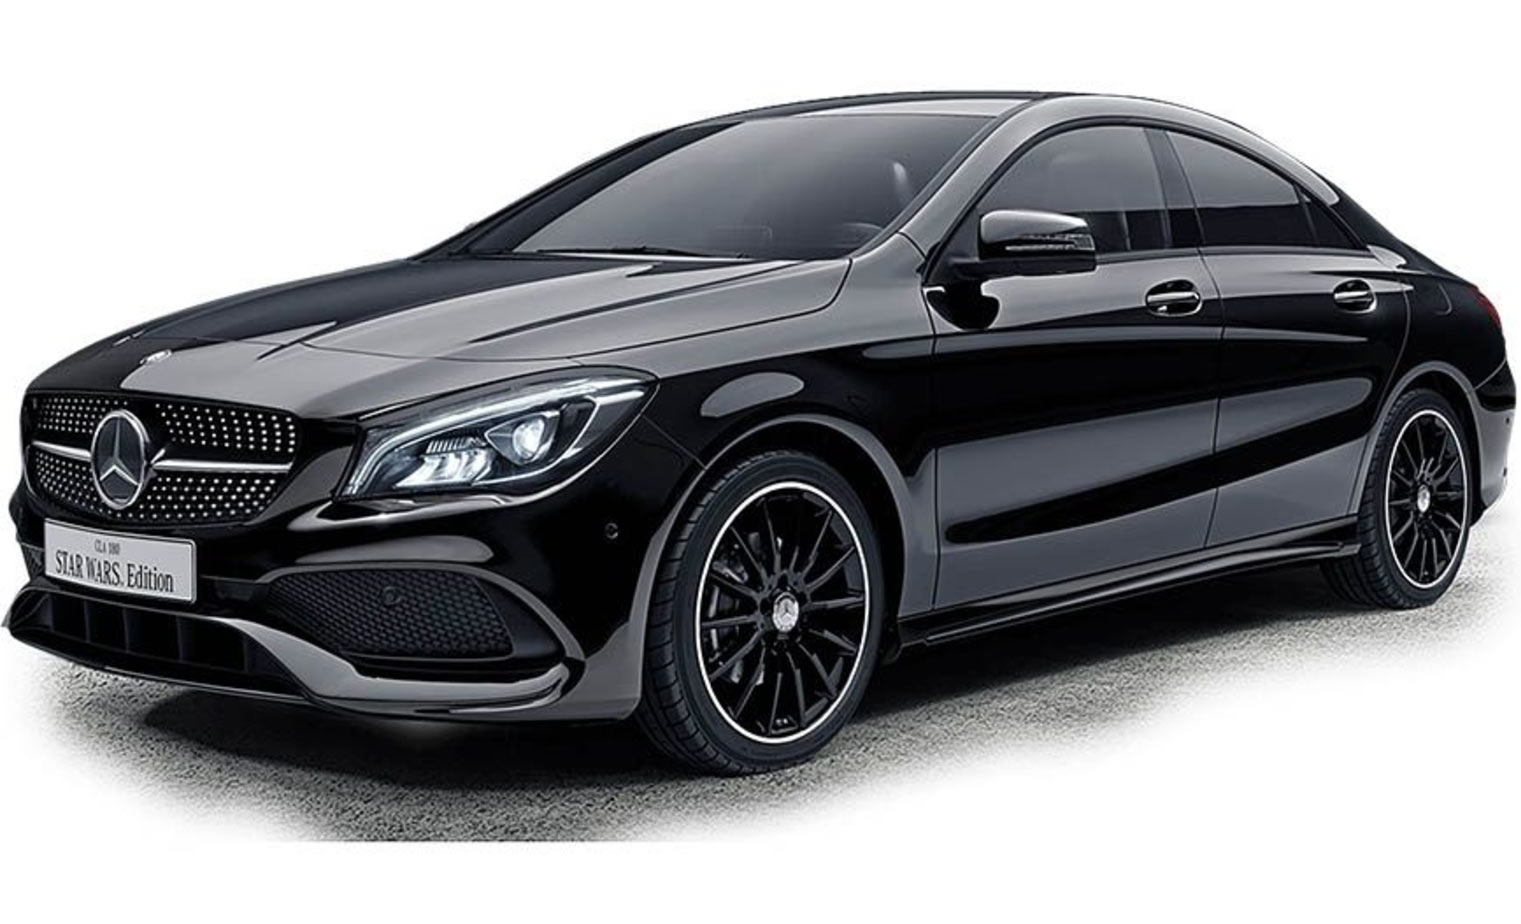 Japan Welcomes Mercedes-Benz CLA 180 Star Wars Edition | Carscoops